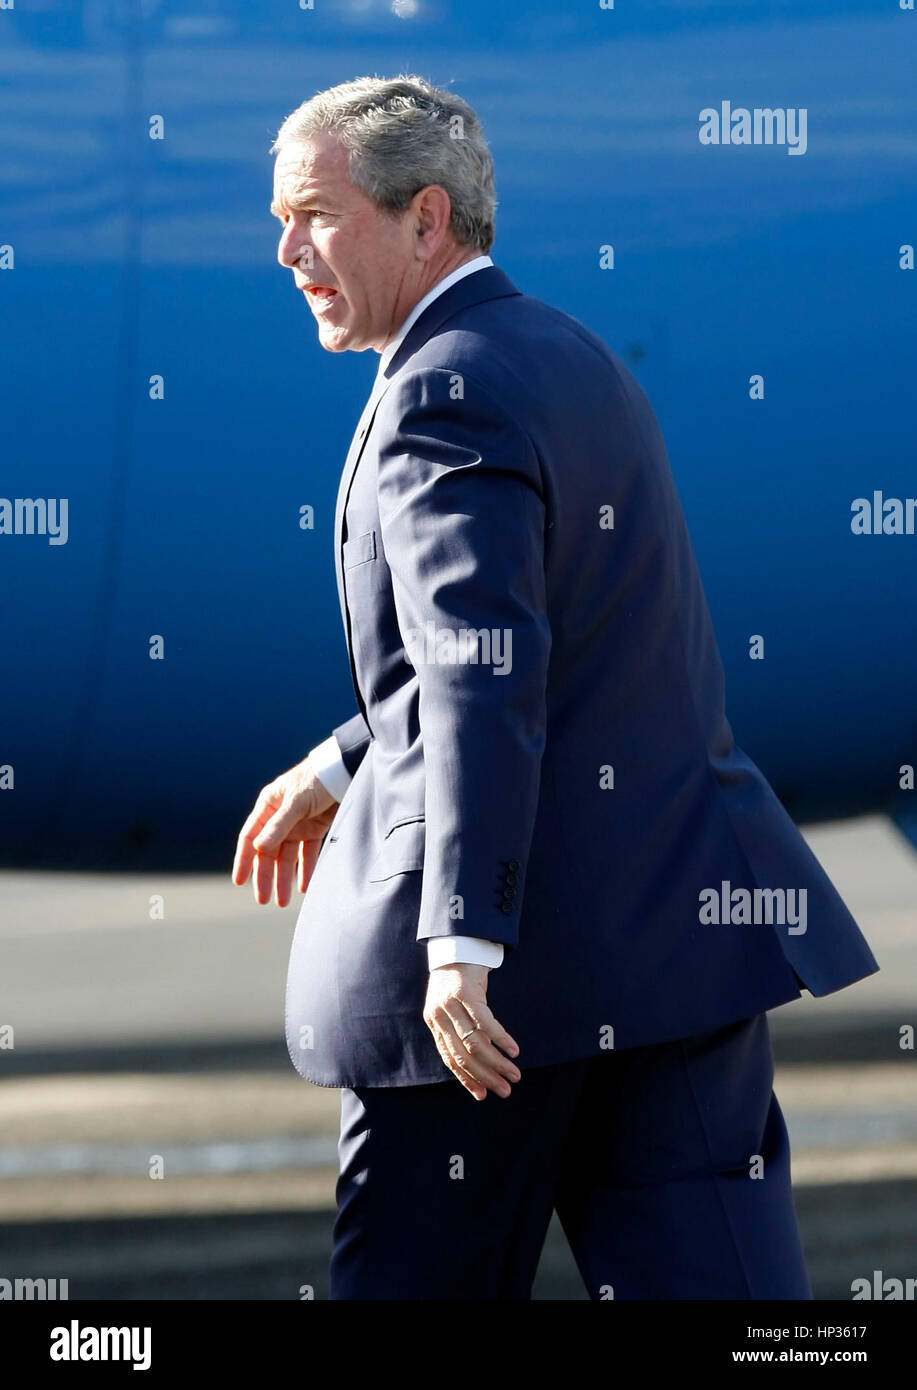 President Bush walks on the tarmac at the Palm Springs International Airport before boarding Air Force One in Palm Springs, Calif. on Monday, April 24, 2006. Photo by Francis Specker Stock Photo